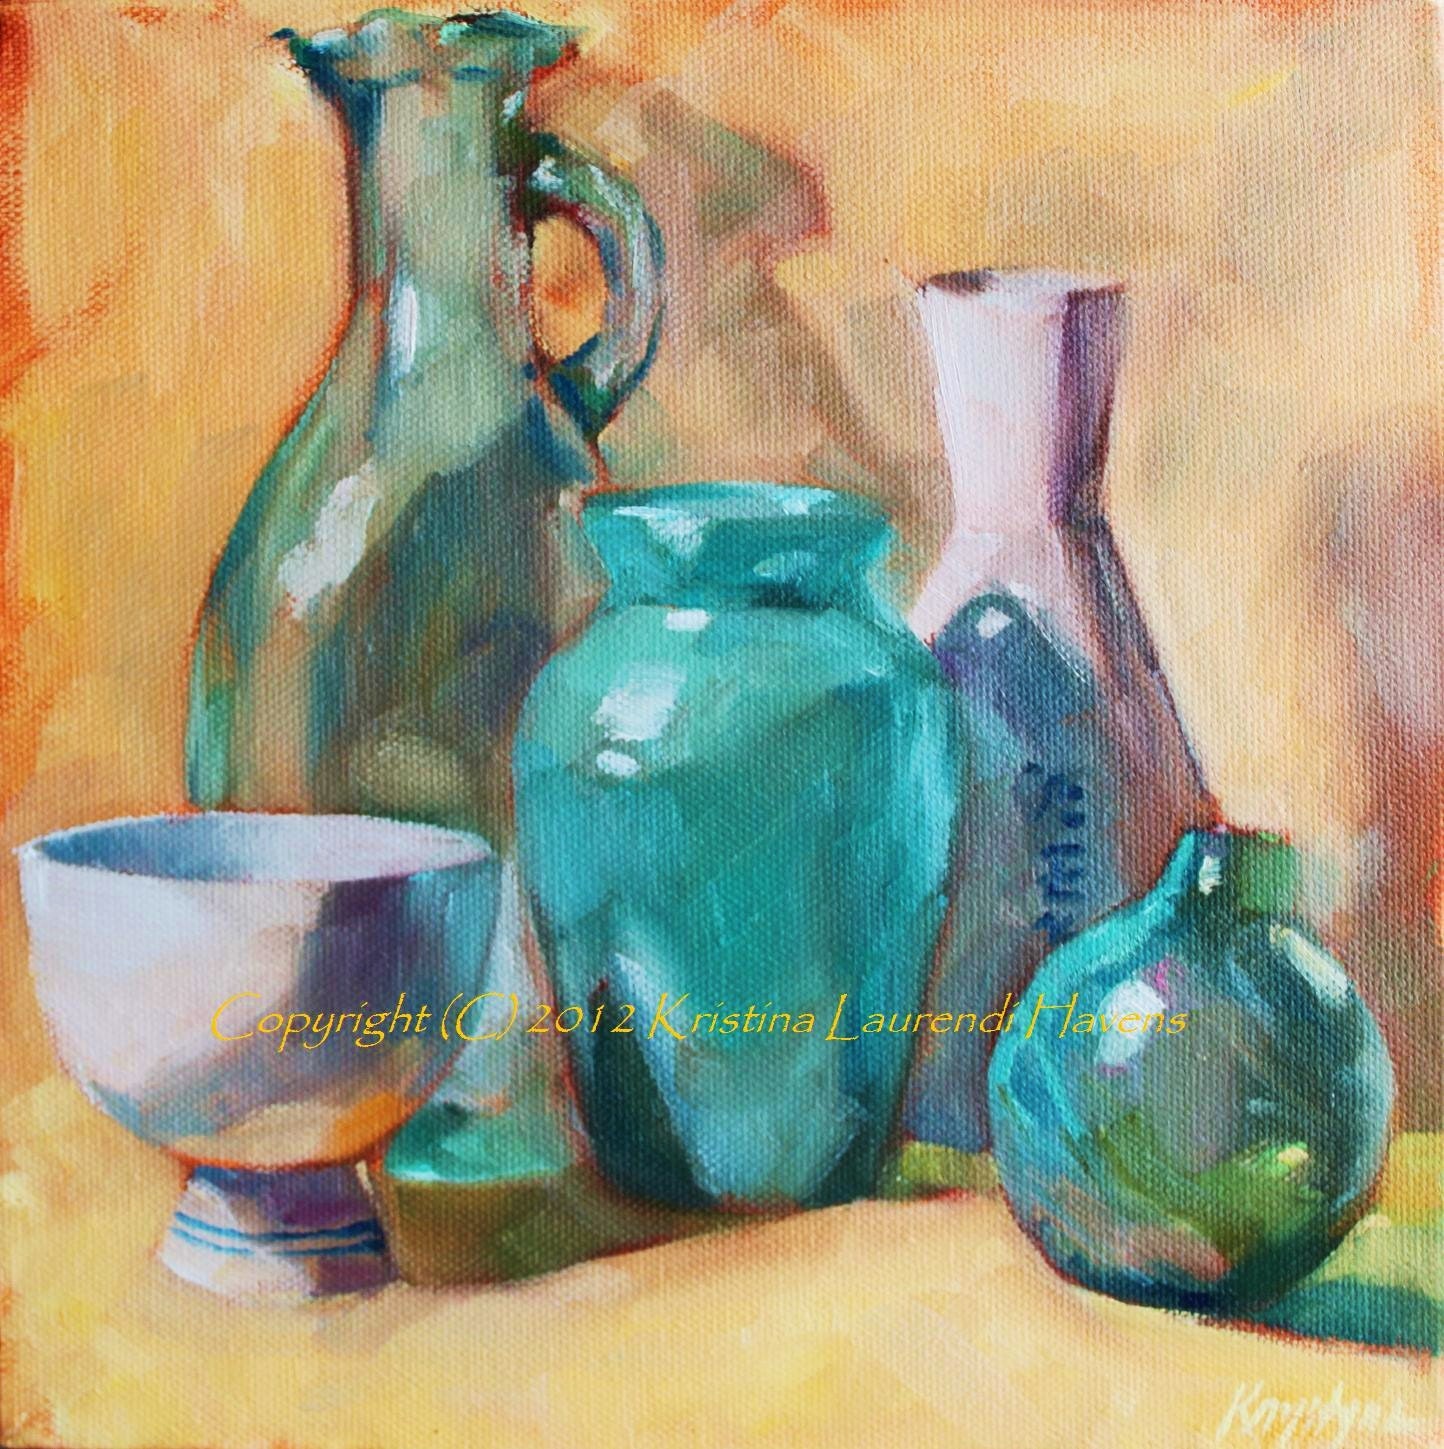 painting of bottles